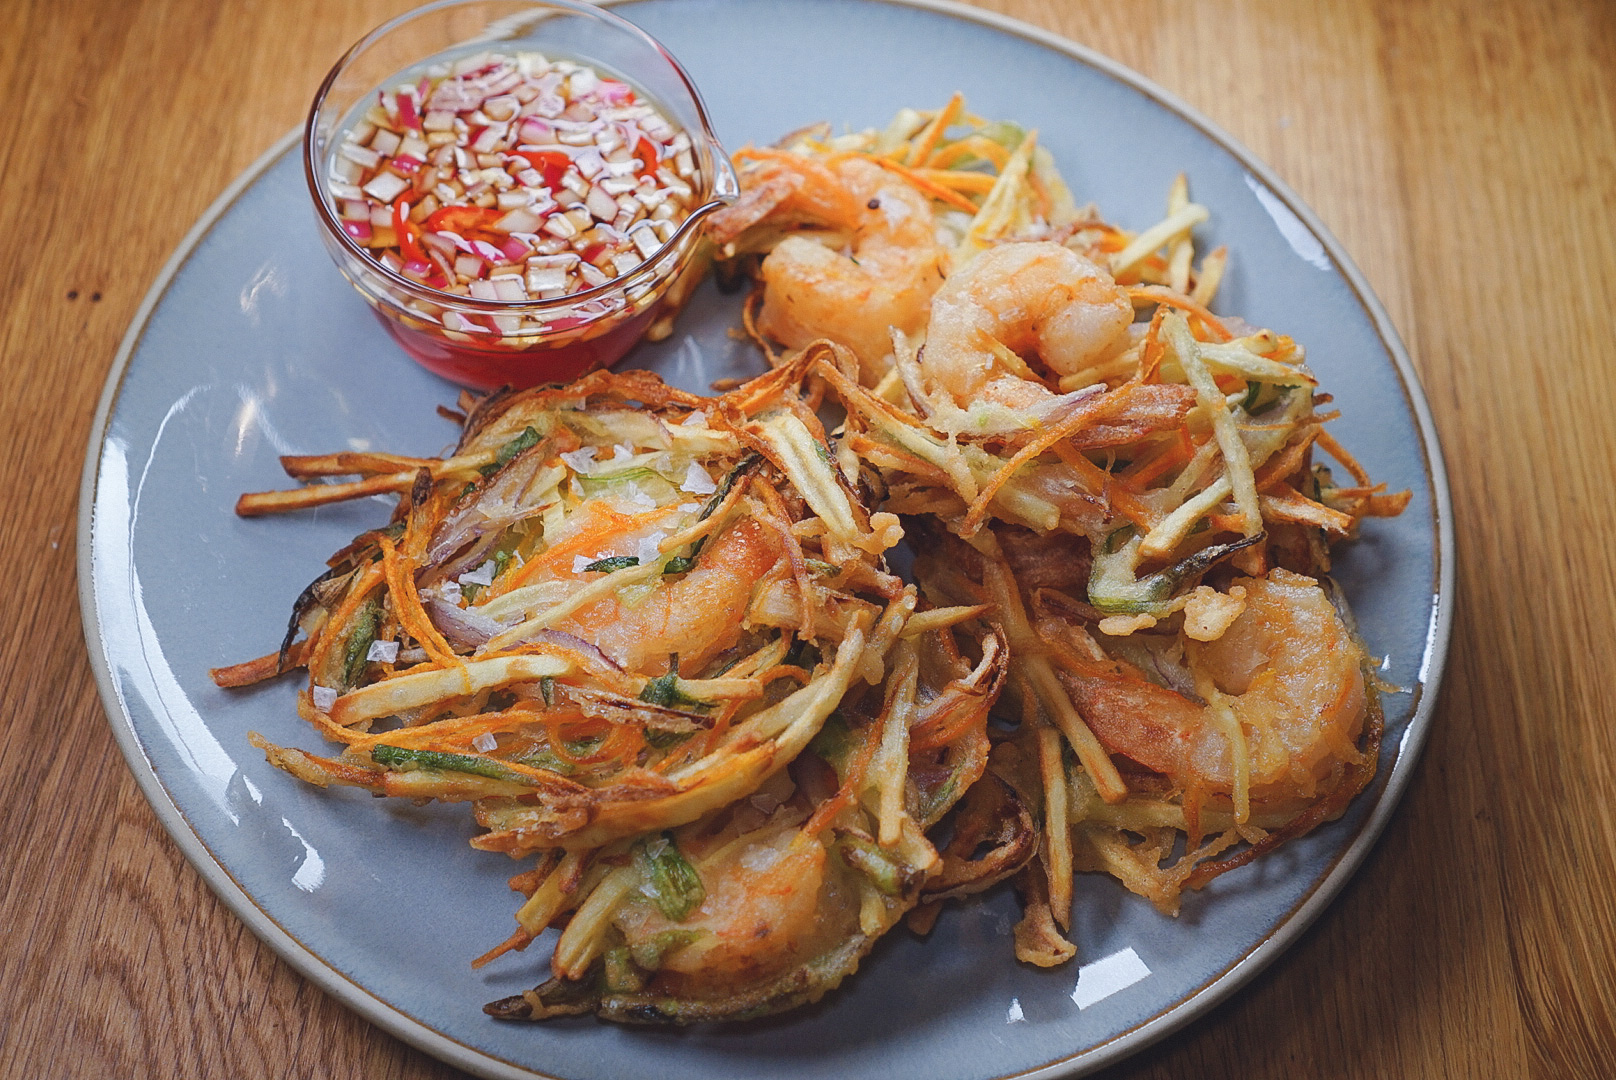 Ukoy (Filipino Shrimp and Vegetable Fritters)